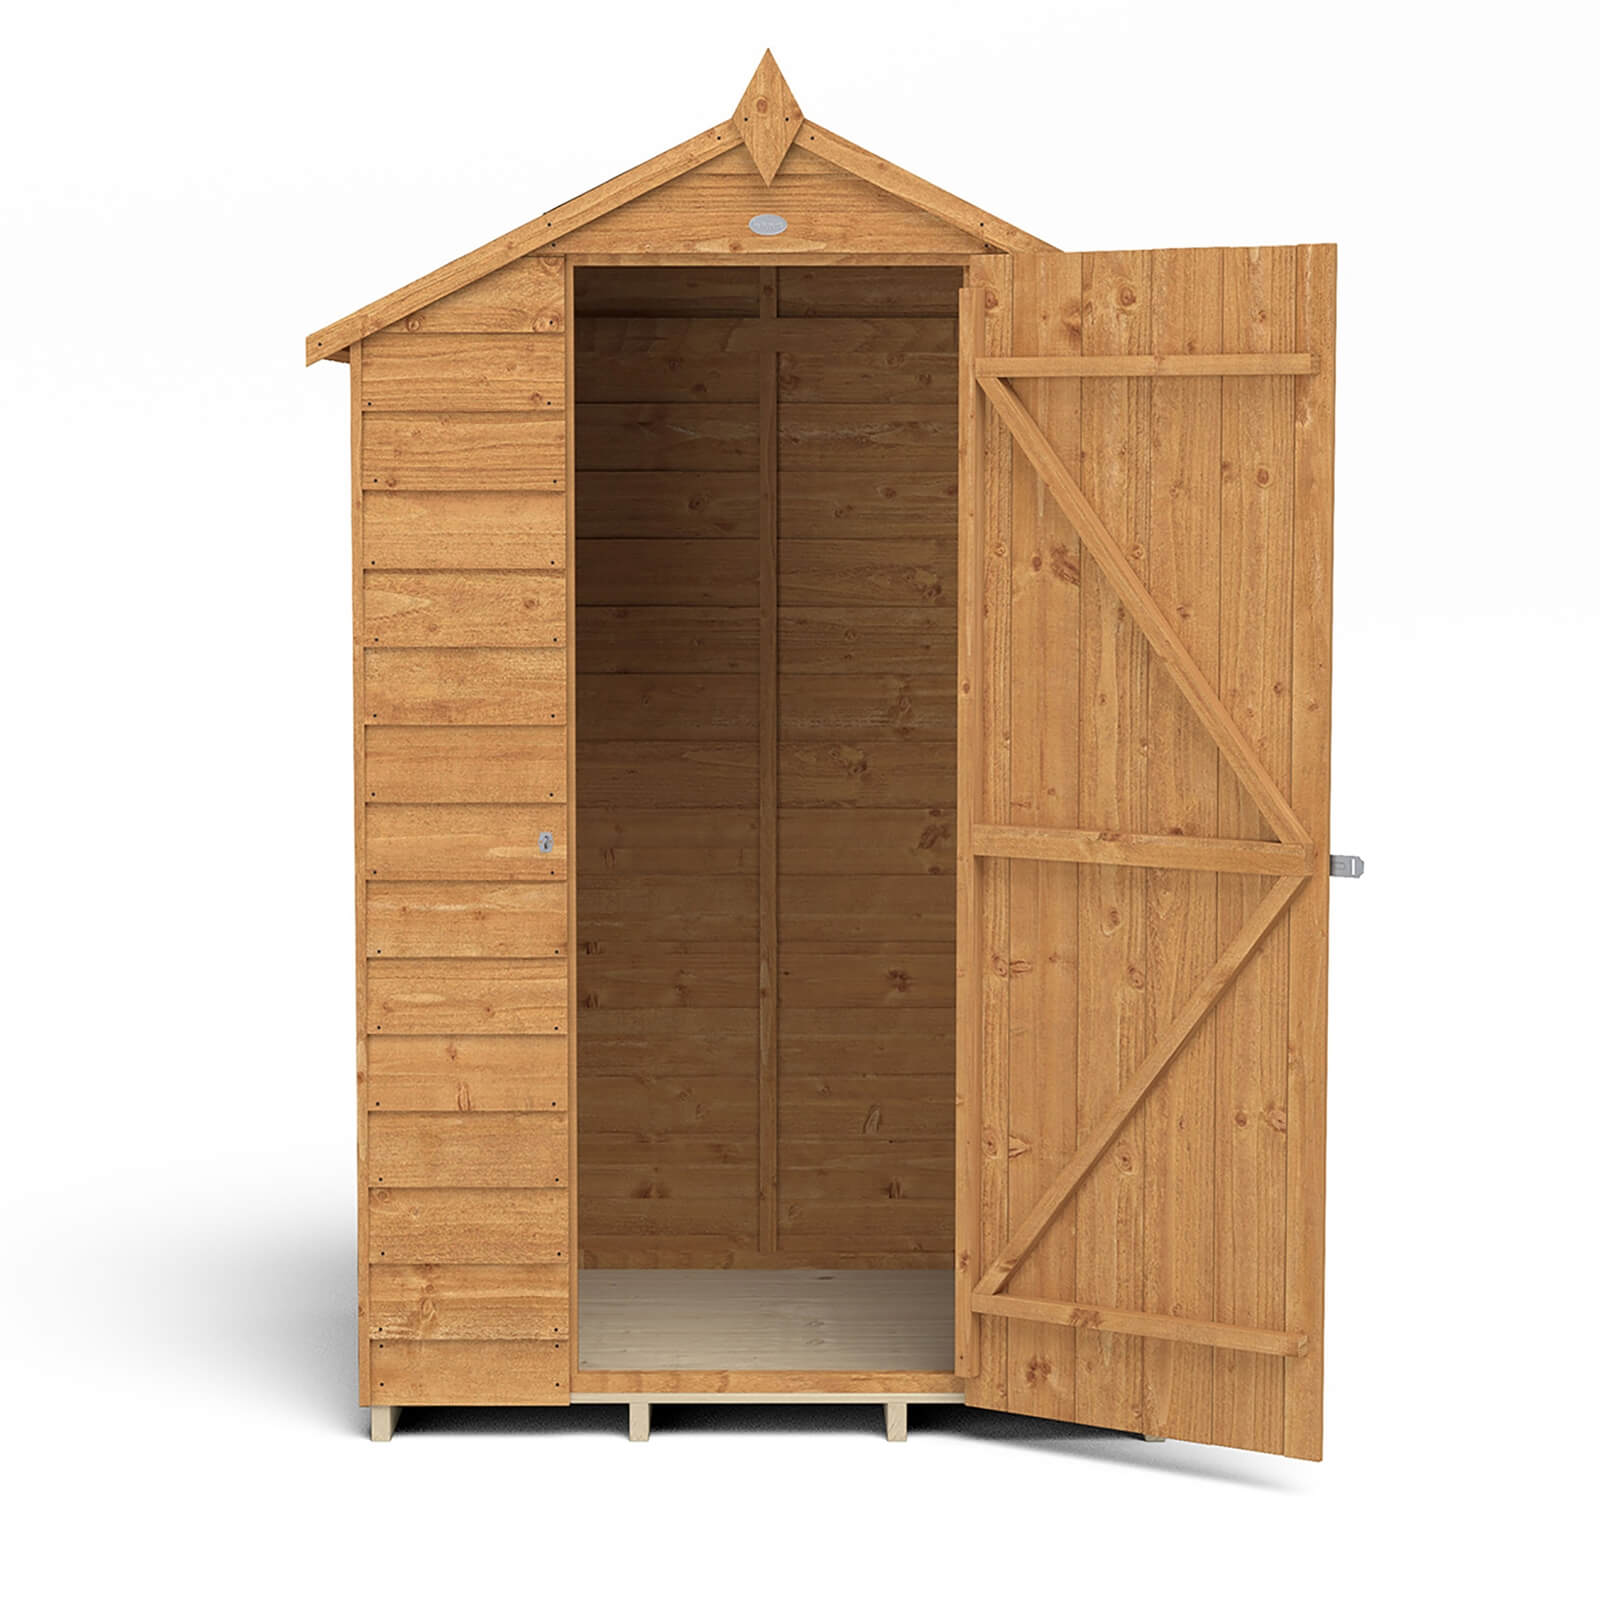 Forest 4 x 3ft Overlap Dip Treated Apex Shed - No Window -incl. Installation